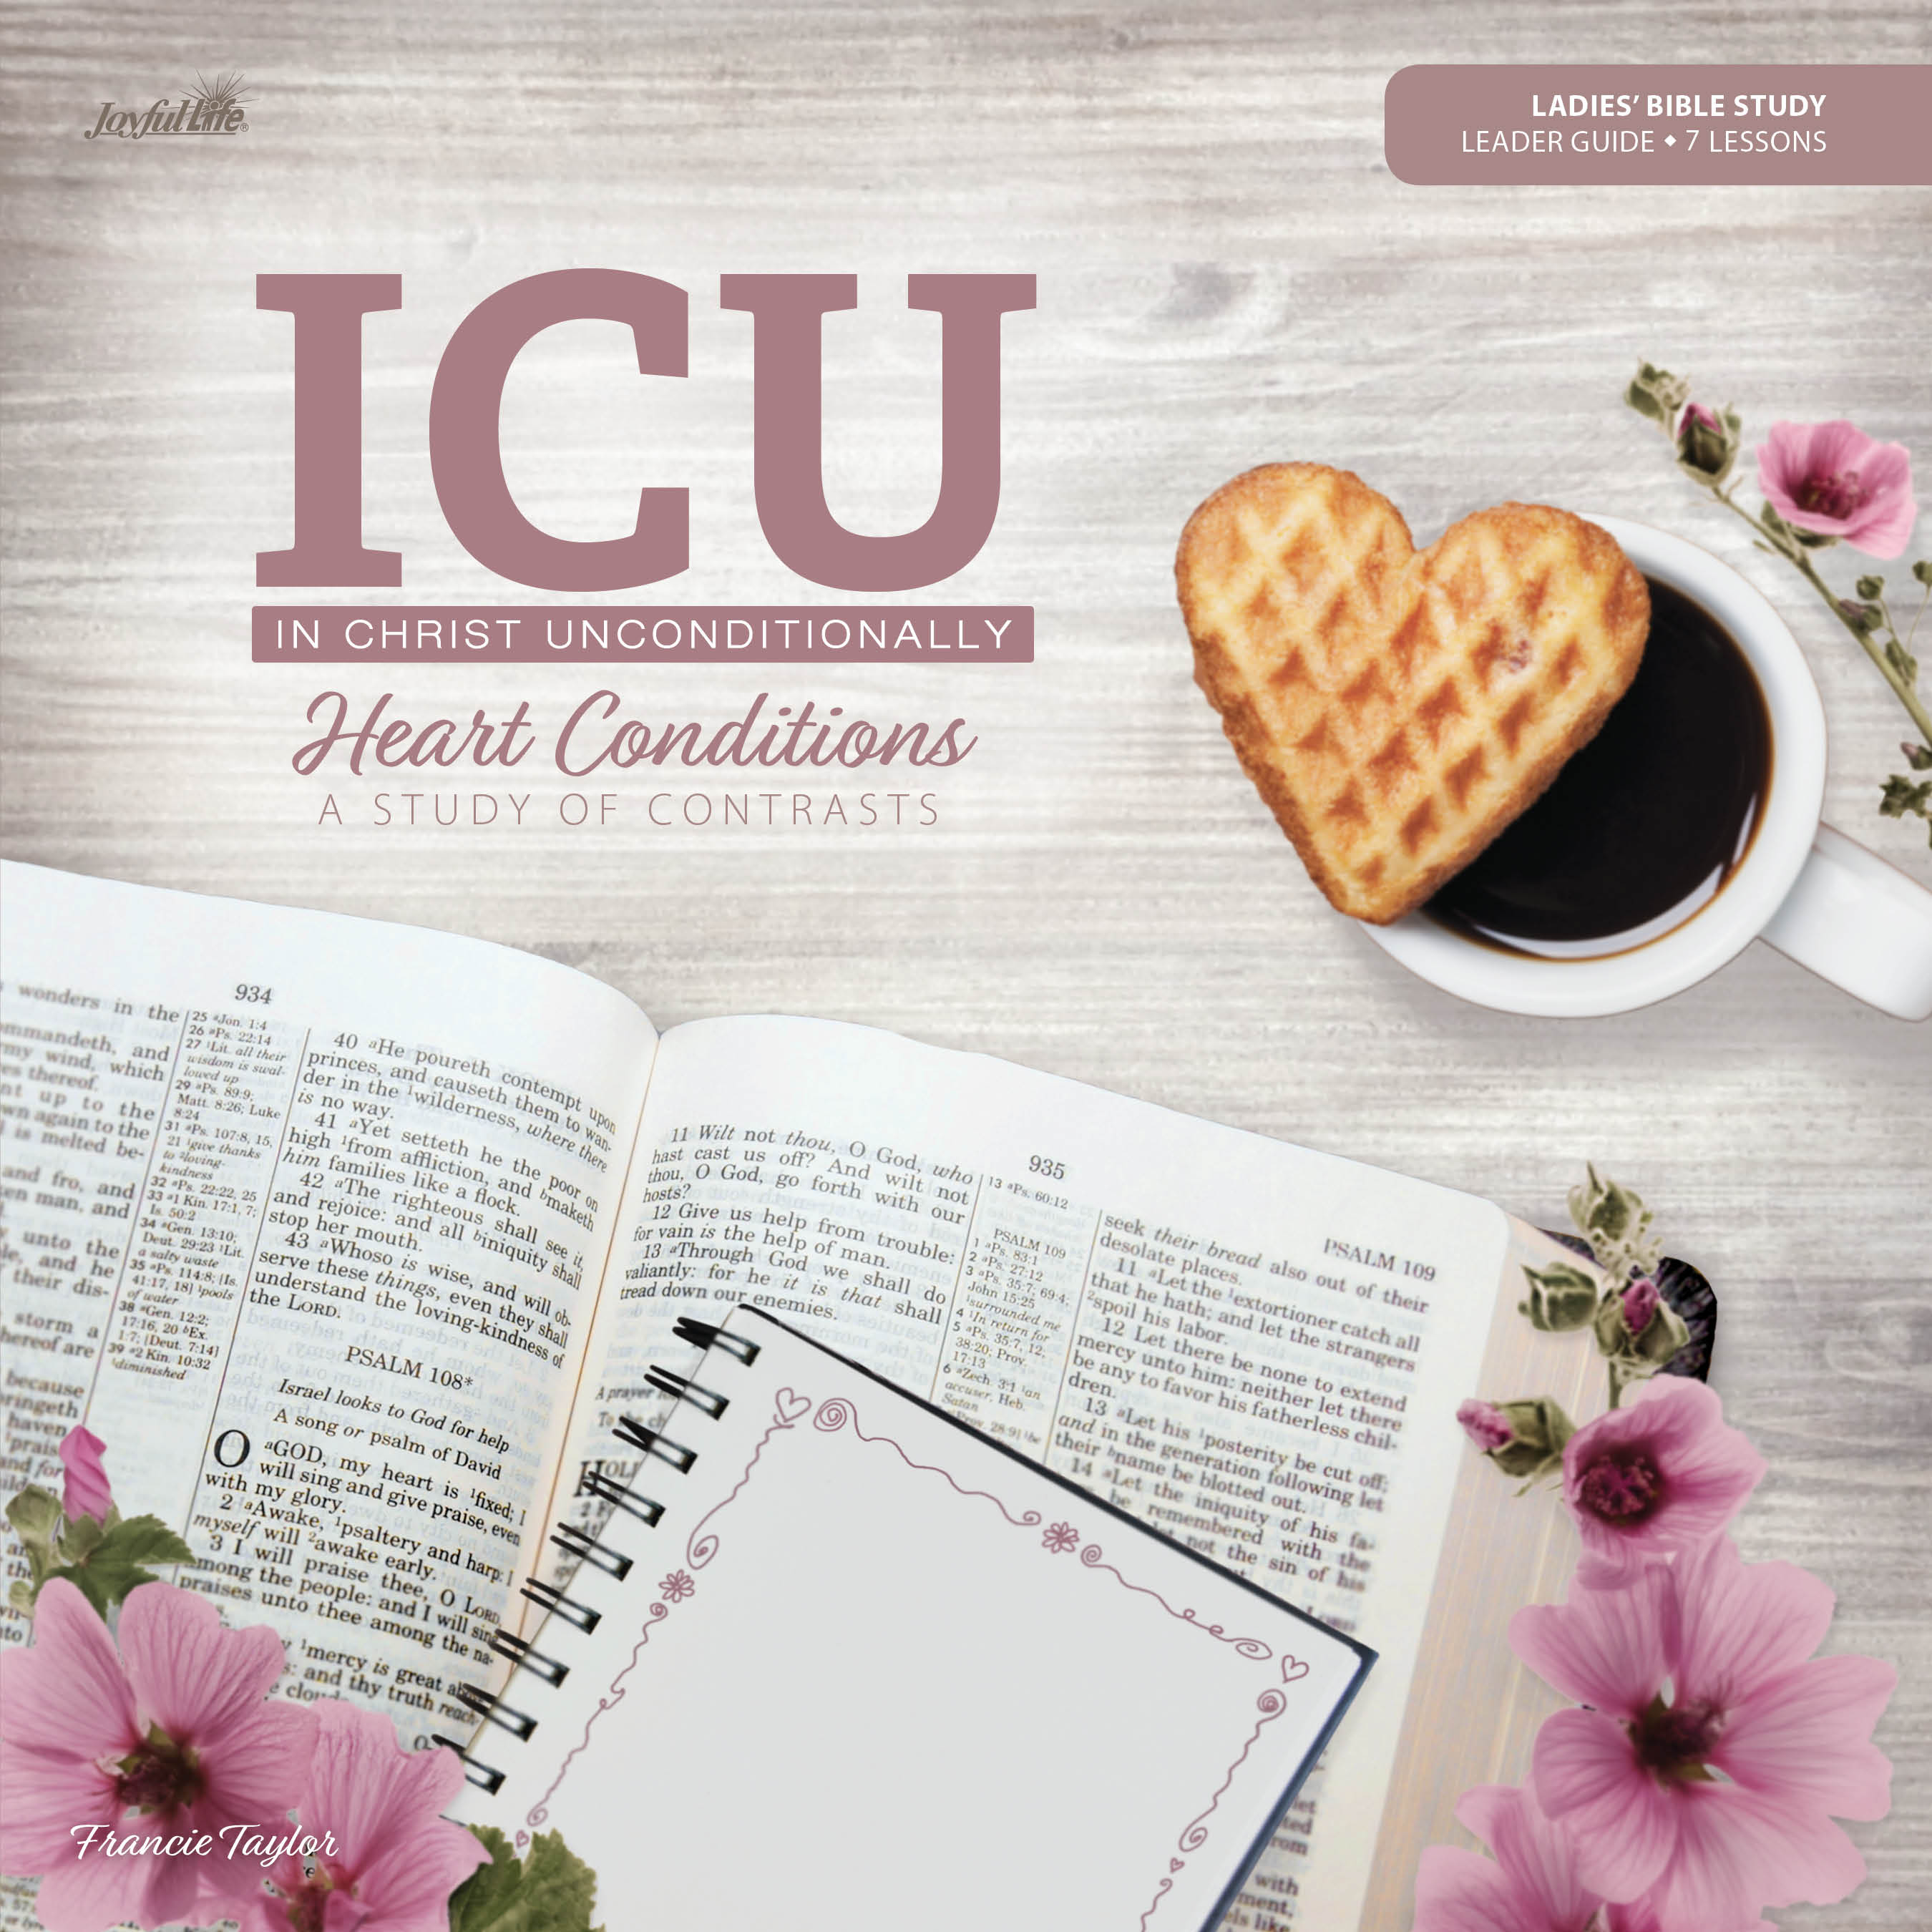 In Christ Unconditionally (ICU): Heart Conditions Leader Guide